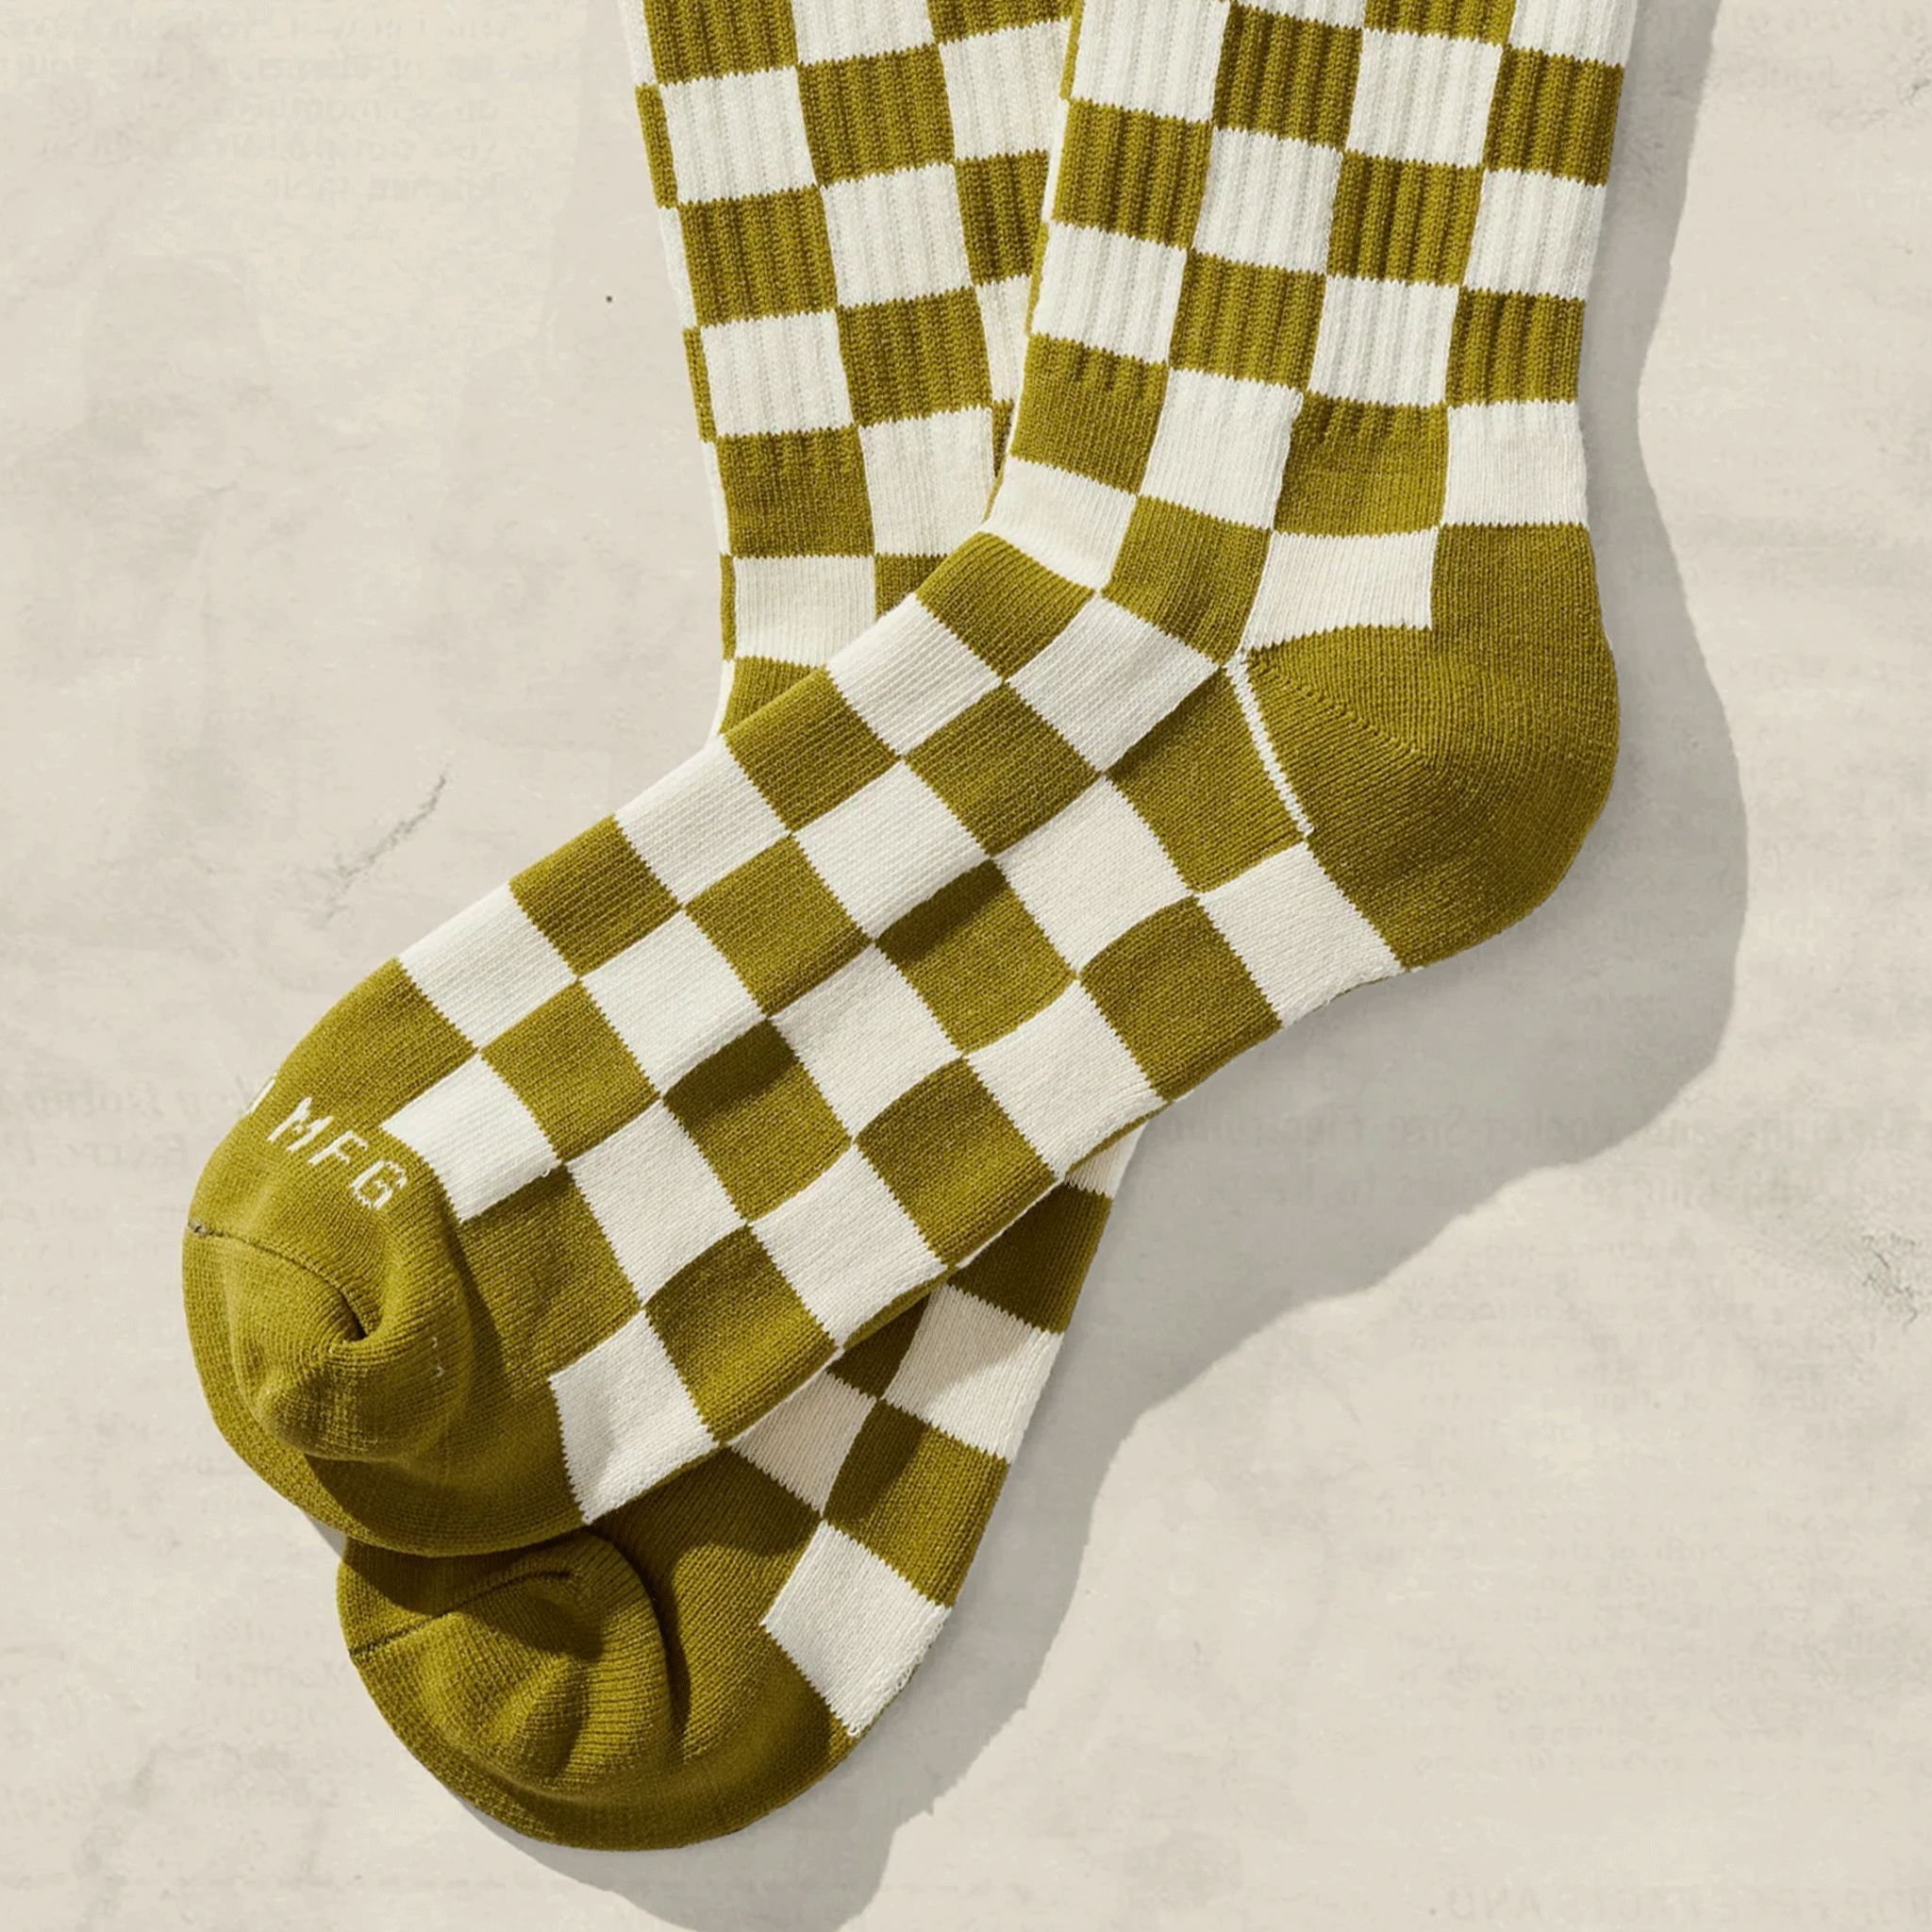 On a cream background is a pair of green and ivory checkered socks.